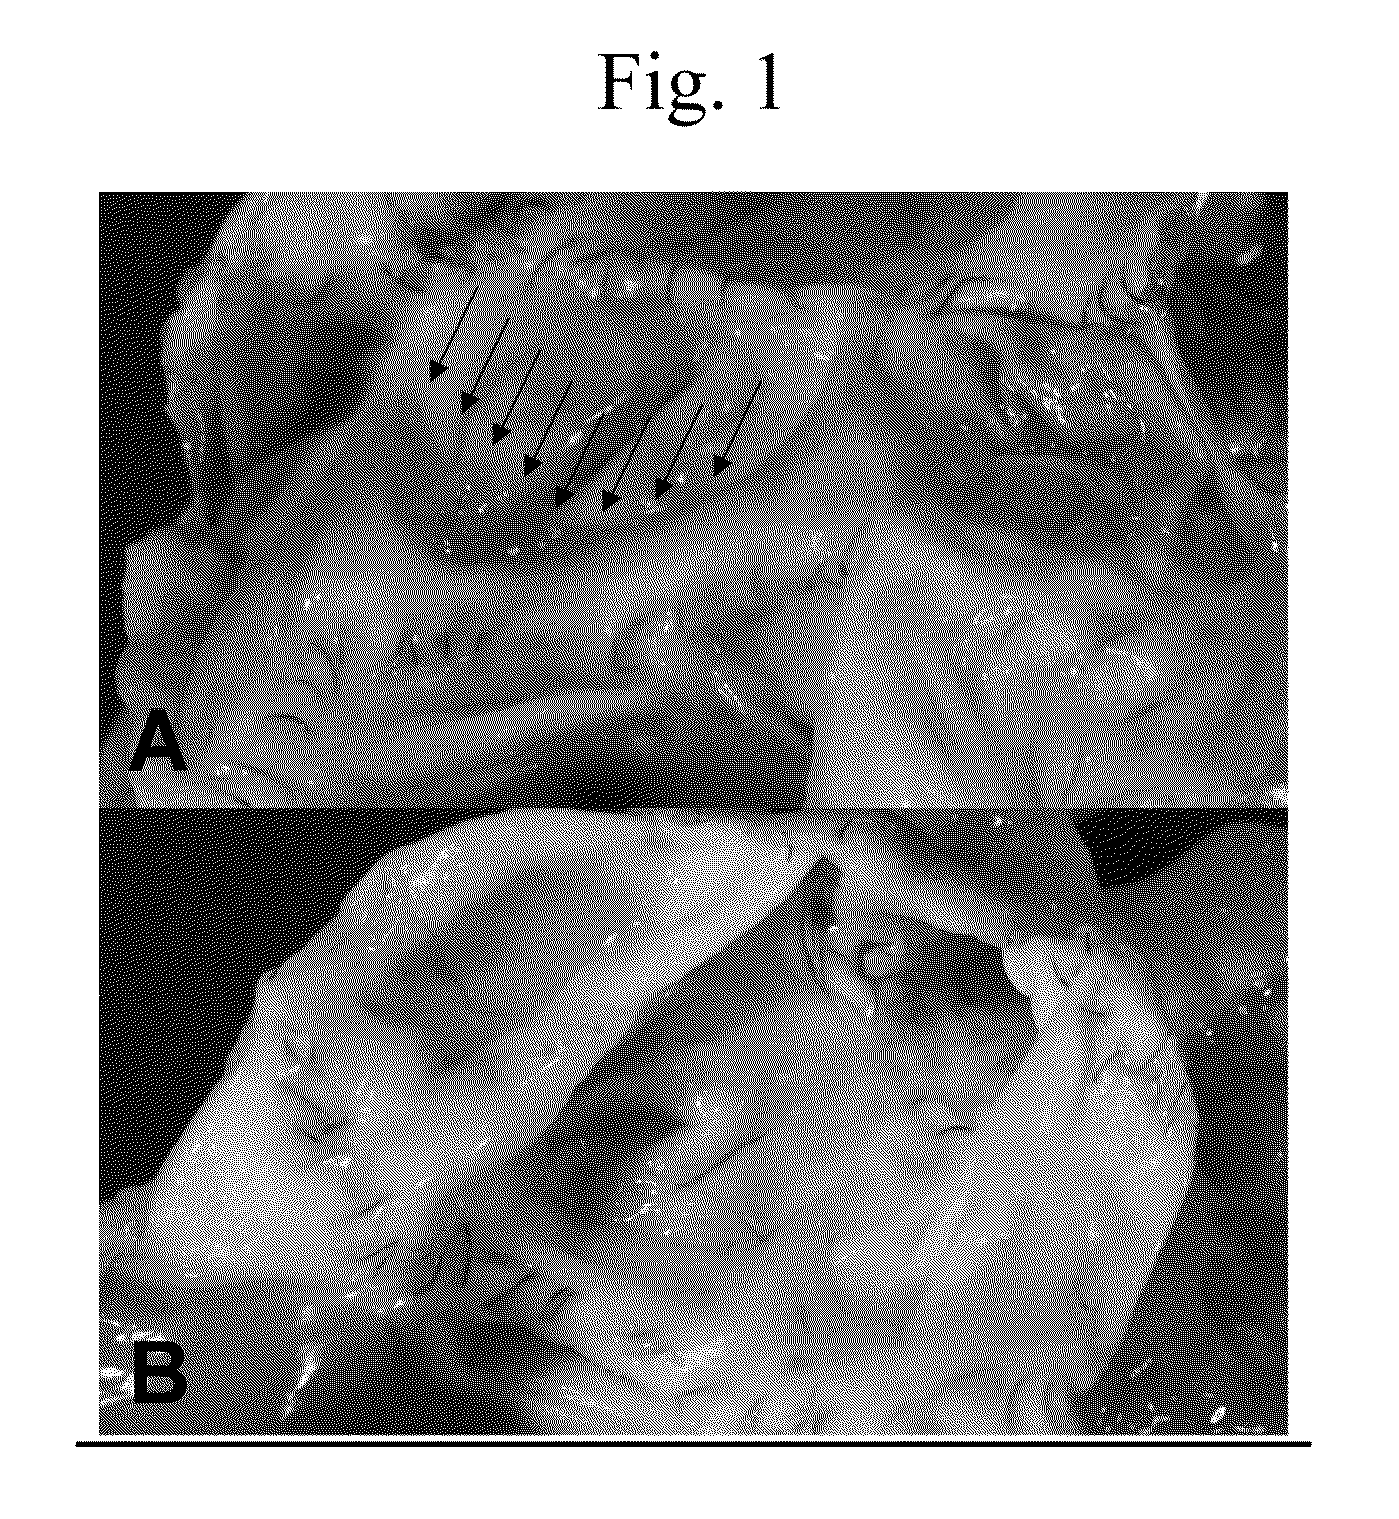 Method for ice-free cryopreservation of tissue